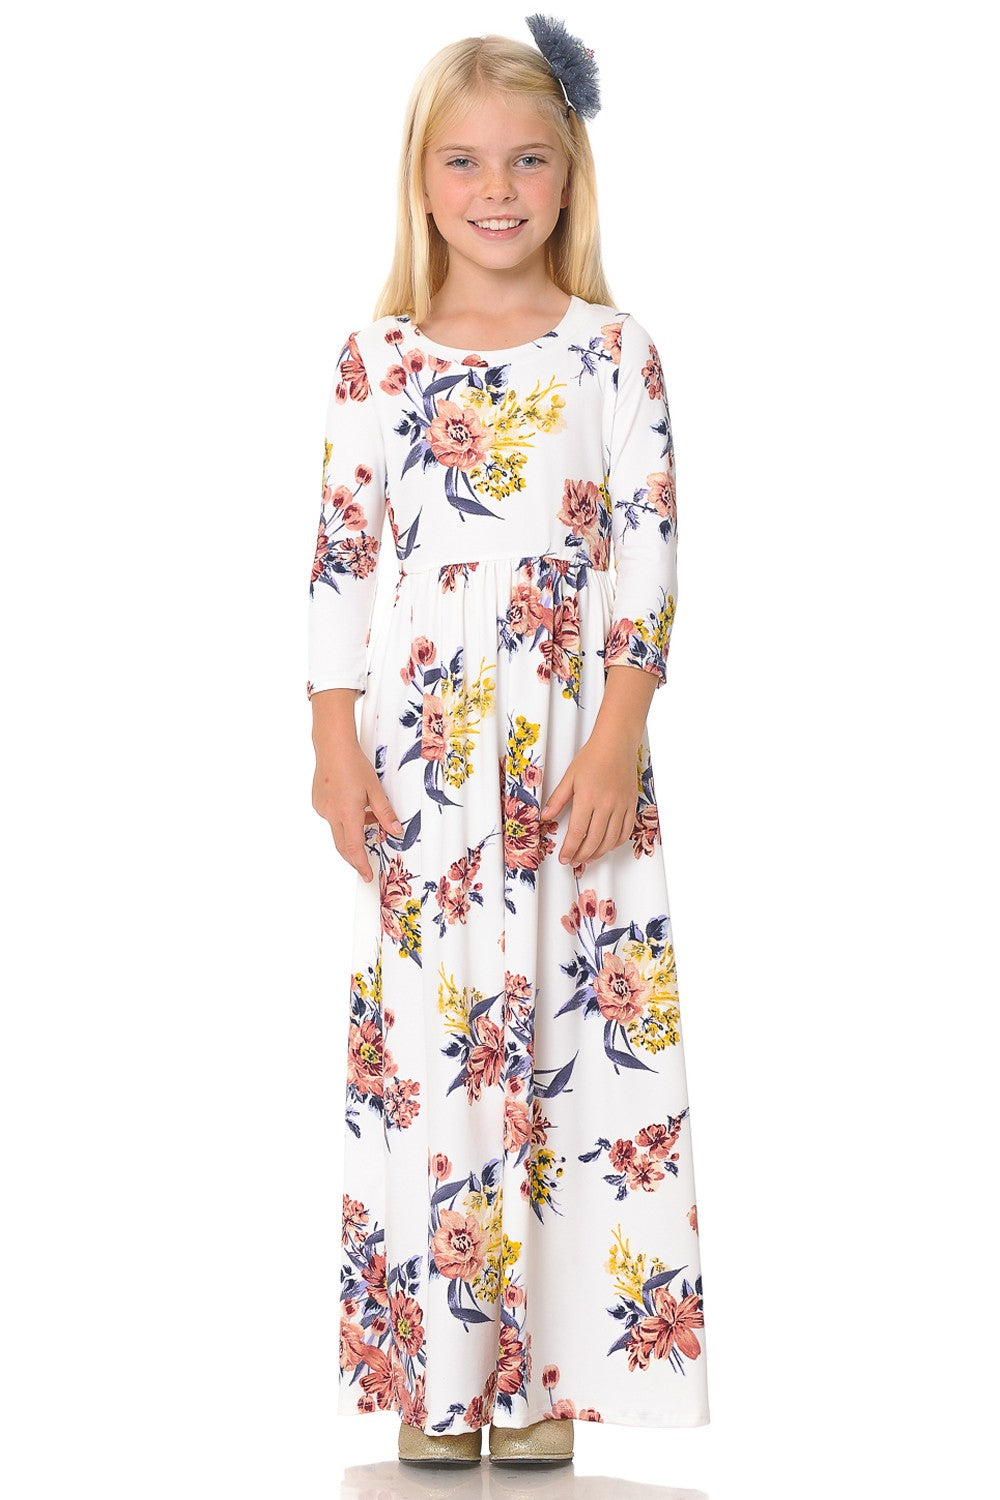 Girls 3/4 Length Sleeve maxi Dress 5004 in Ivory Floral